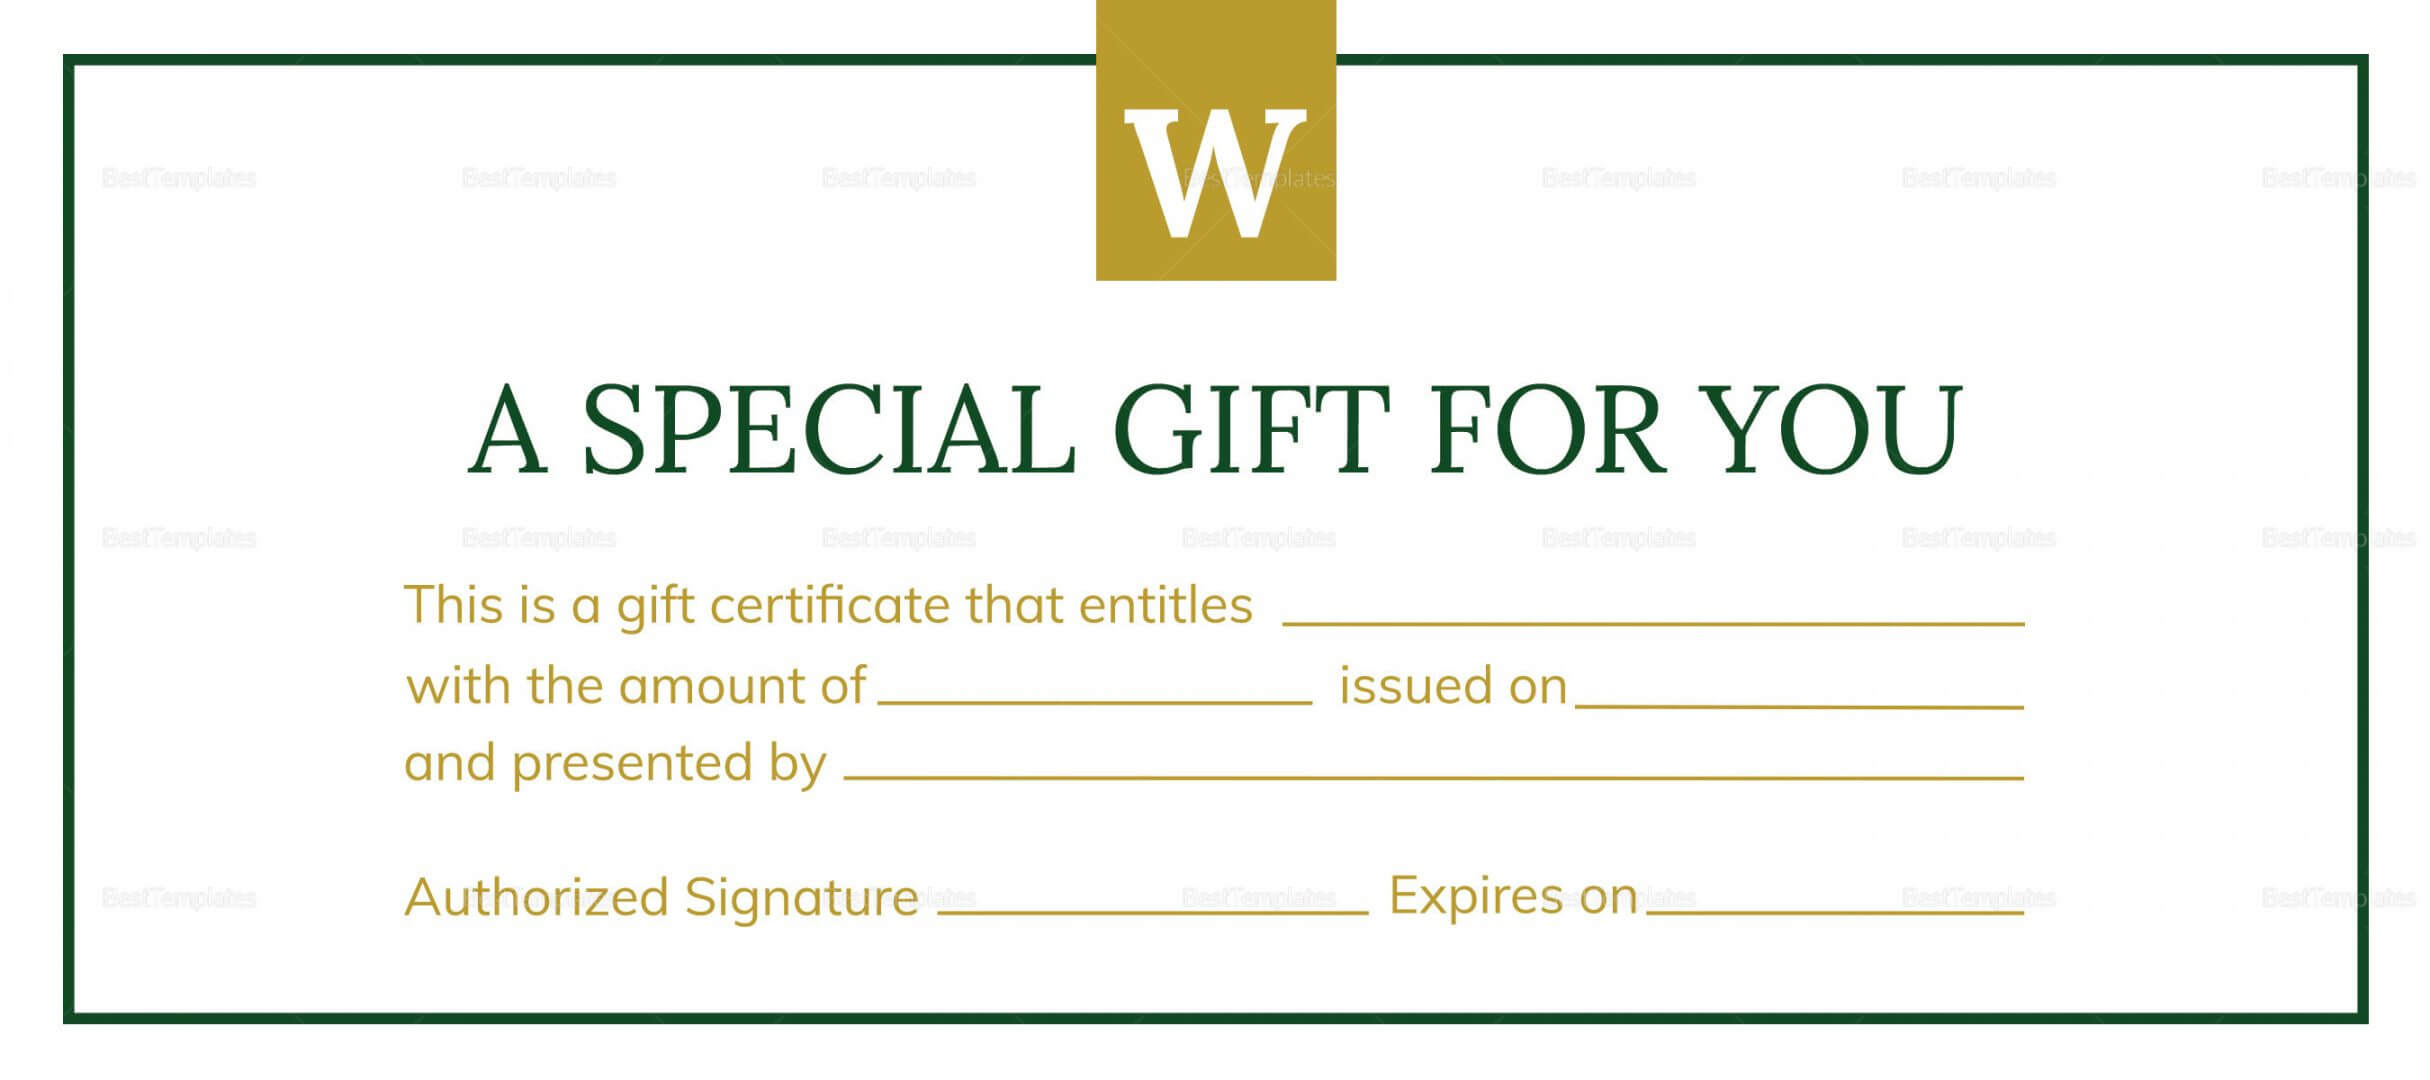 Hotel Gift Certificate Template In This Certificate Entitles The Bearer Template